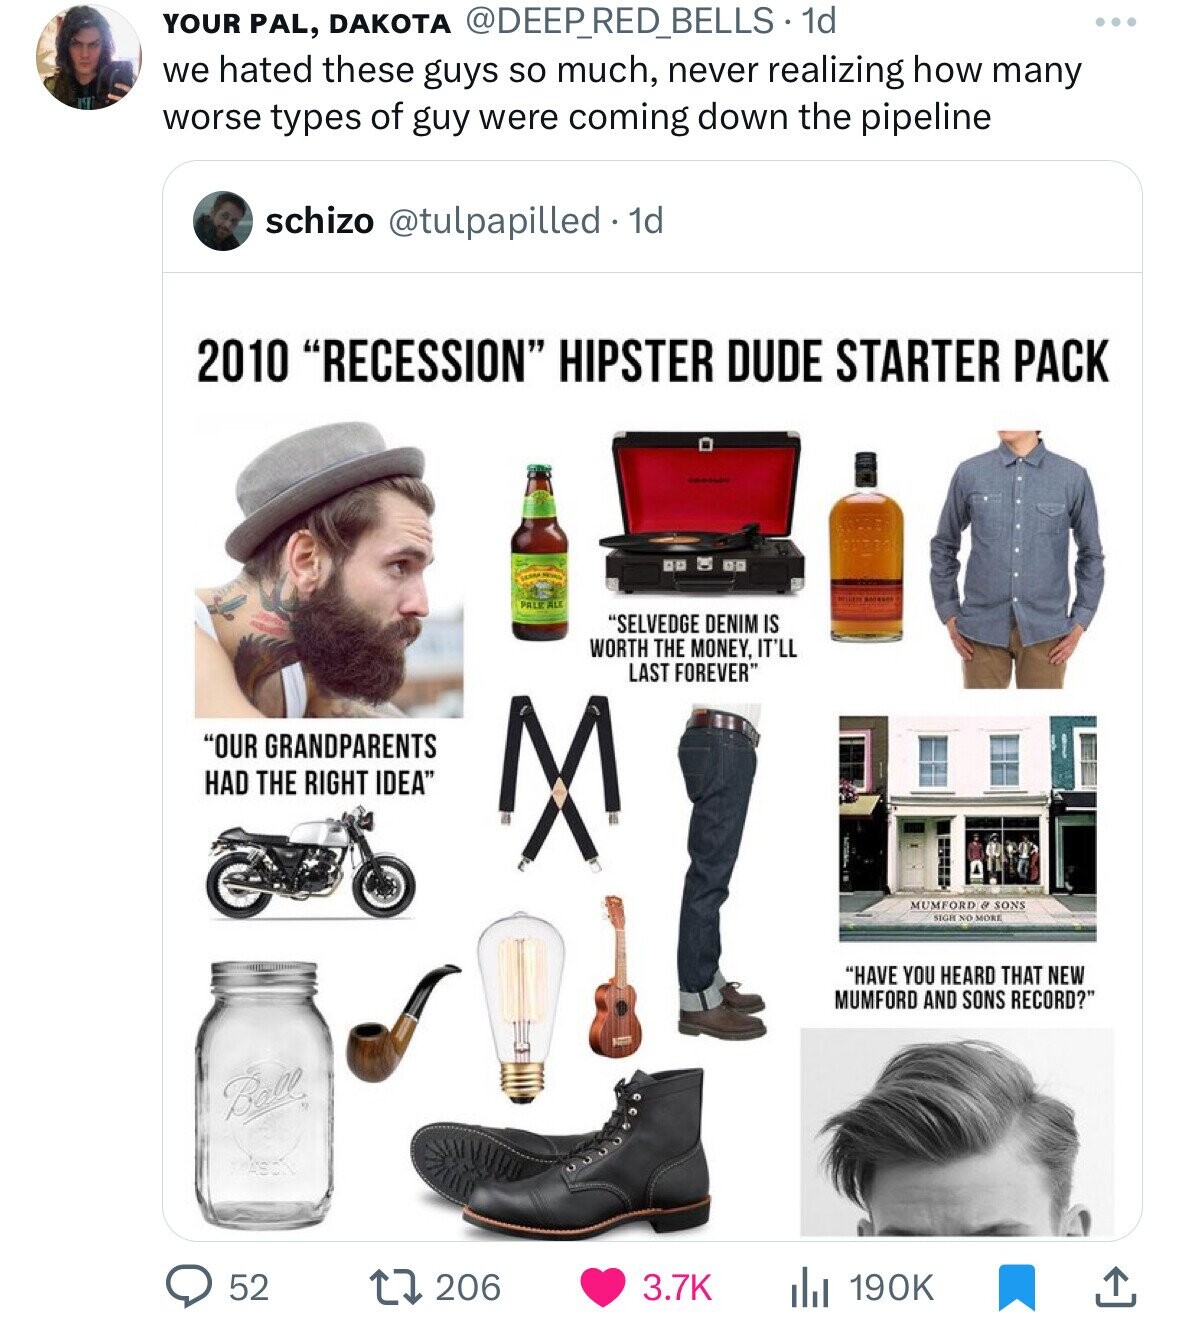 web page - Your Pal, Dakota 1d we hated these guys so much, never realizing how many worse types of guy were coming down the pipeline schizo 1d 2010 "Recession" Hipster Dude Starter Pack Pale Ale D "Our Grandparents Had The Right Idea" "Selvedge Denim Is 